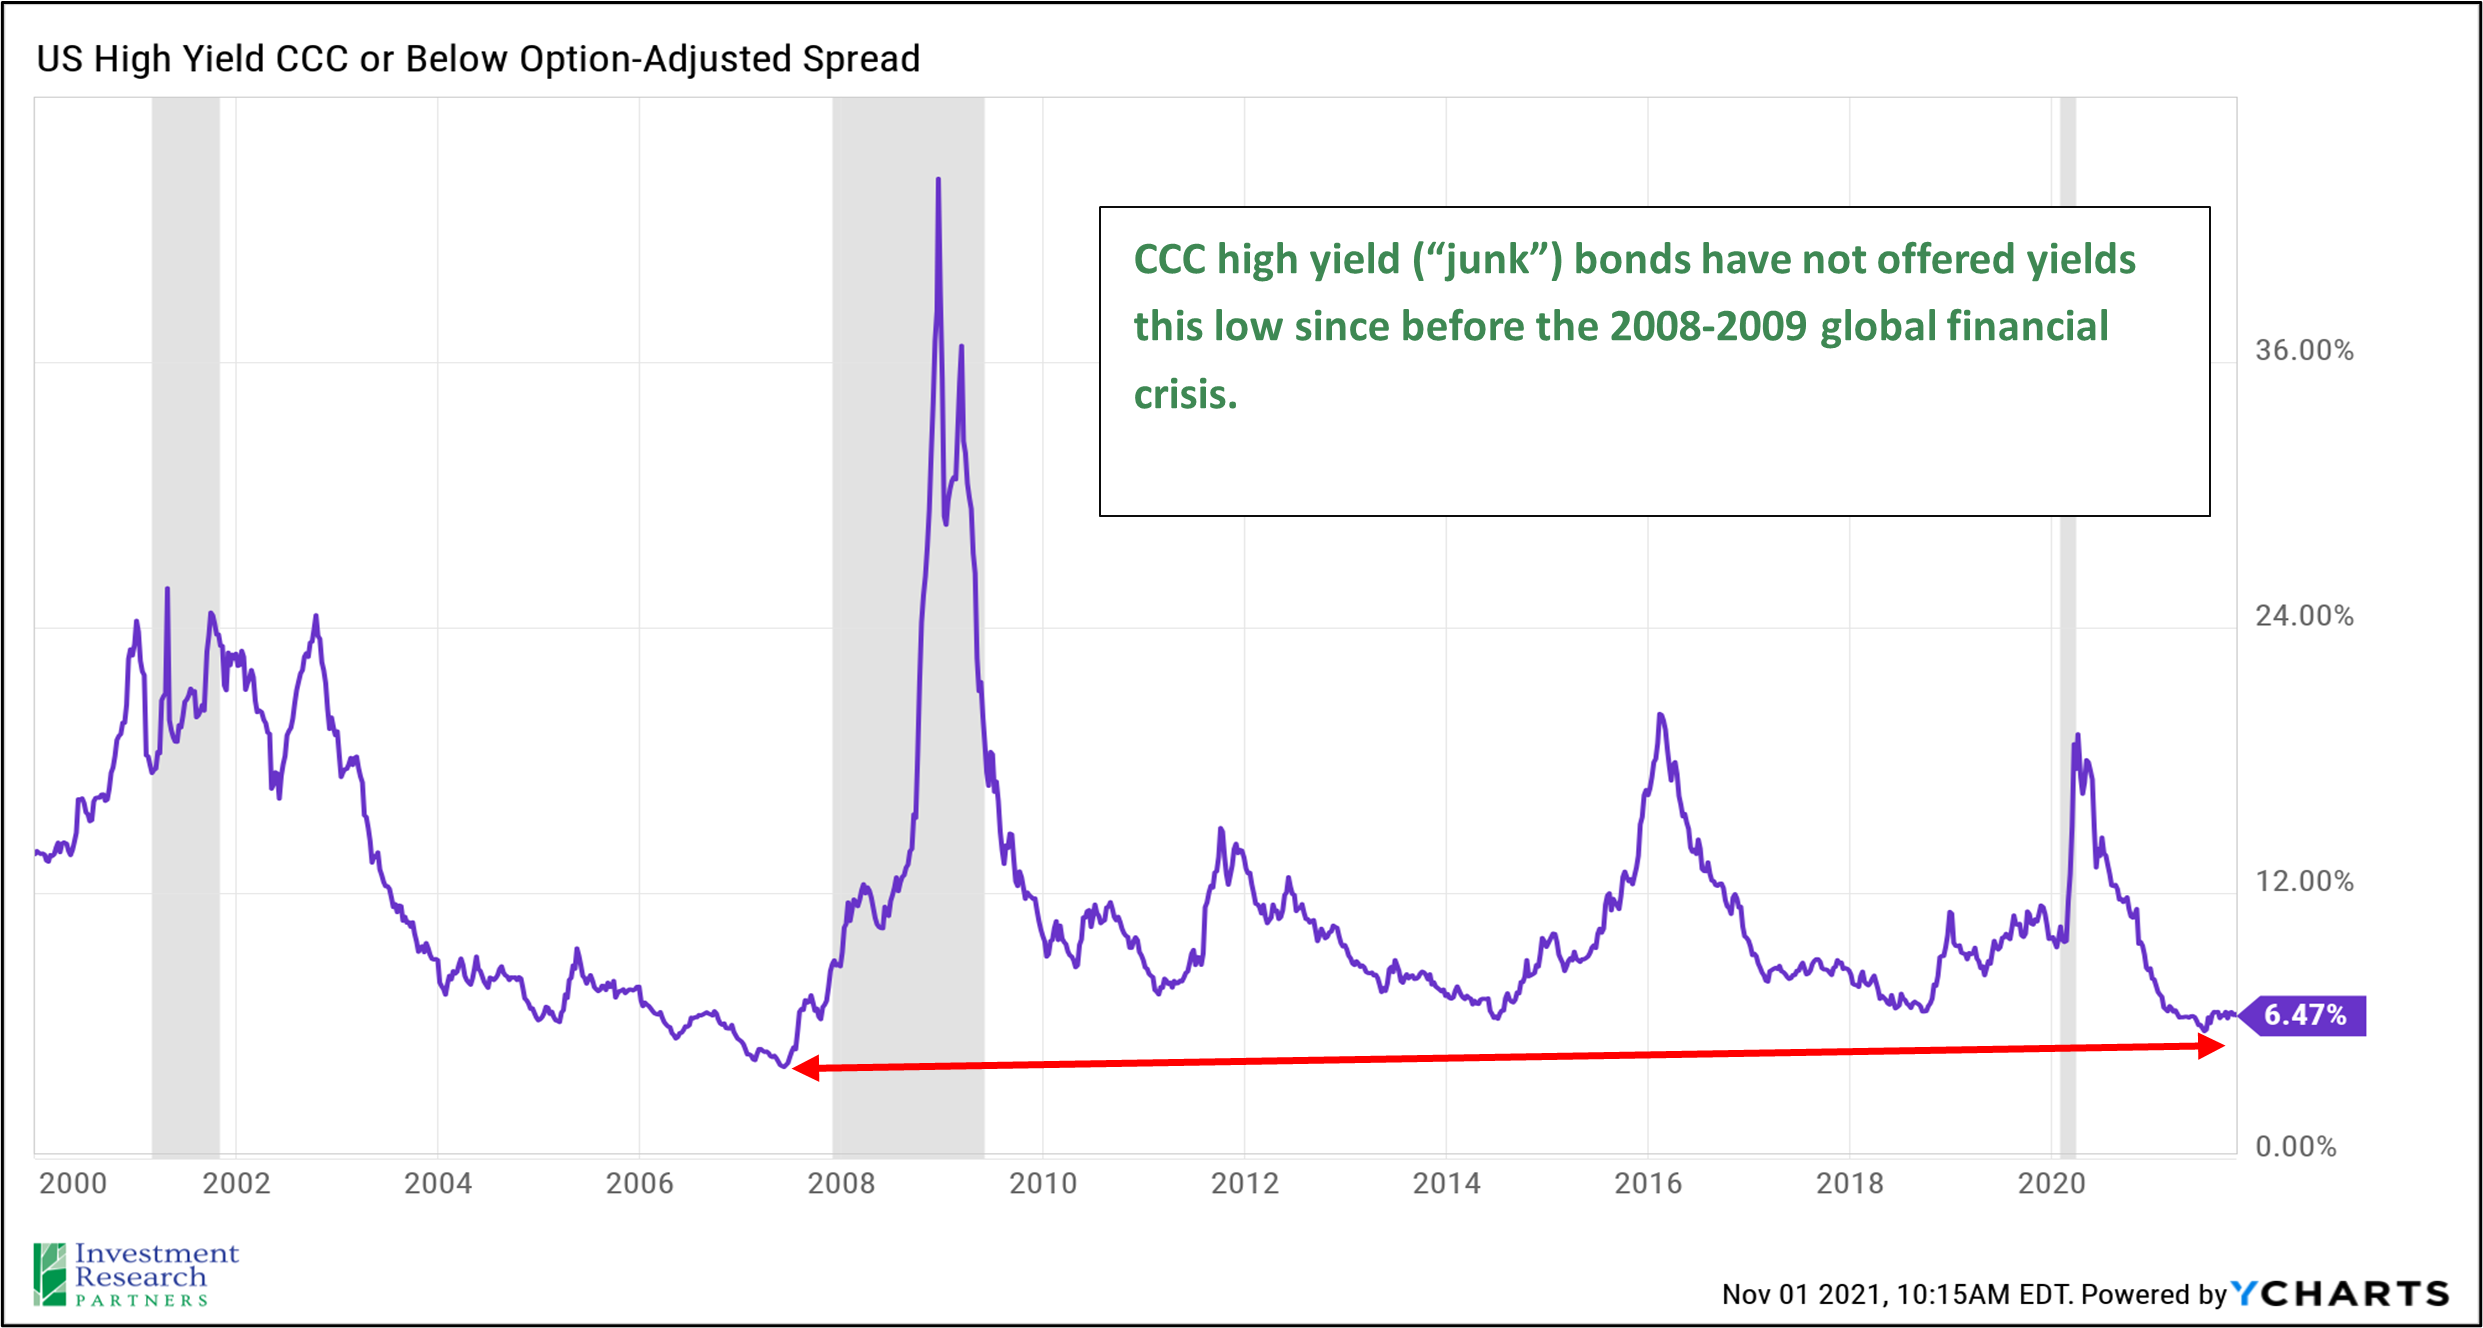 Line graph depicting US High Yield CCC or Below Option-Adjusted Spread from 2000 to 2021 with text reading: CCC high yield ('junk') bonds have not offered yields this low since before the 2008-2009 global financial crisis.